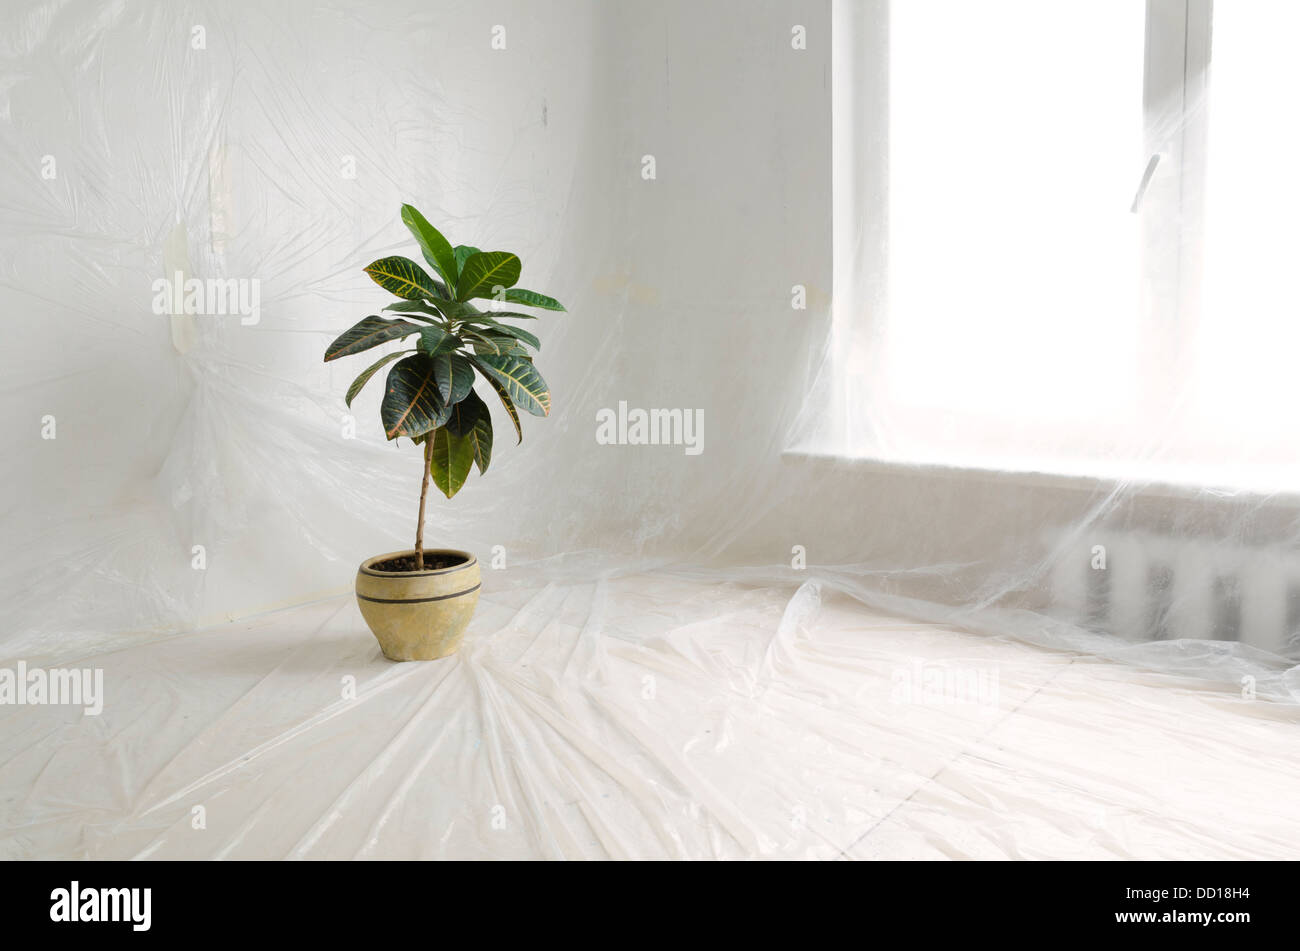 home renovation interior protected by thin plastic film with green plant in big ceramic pot Stock Photo